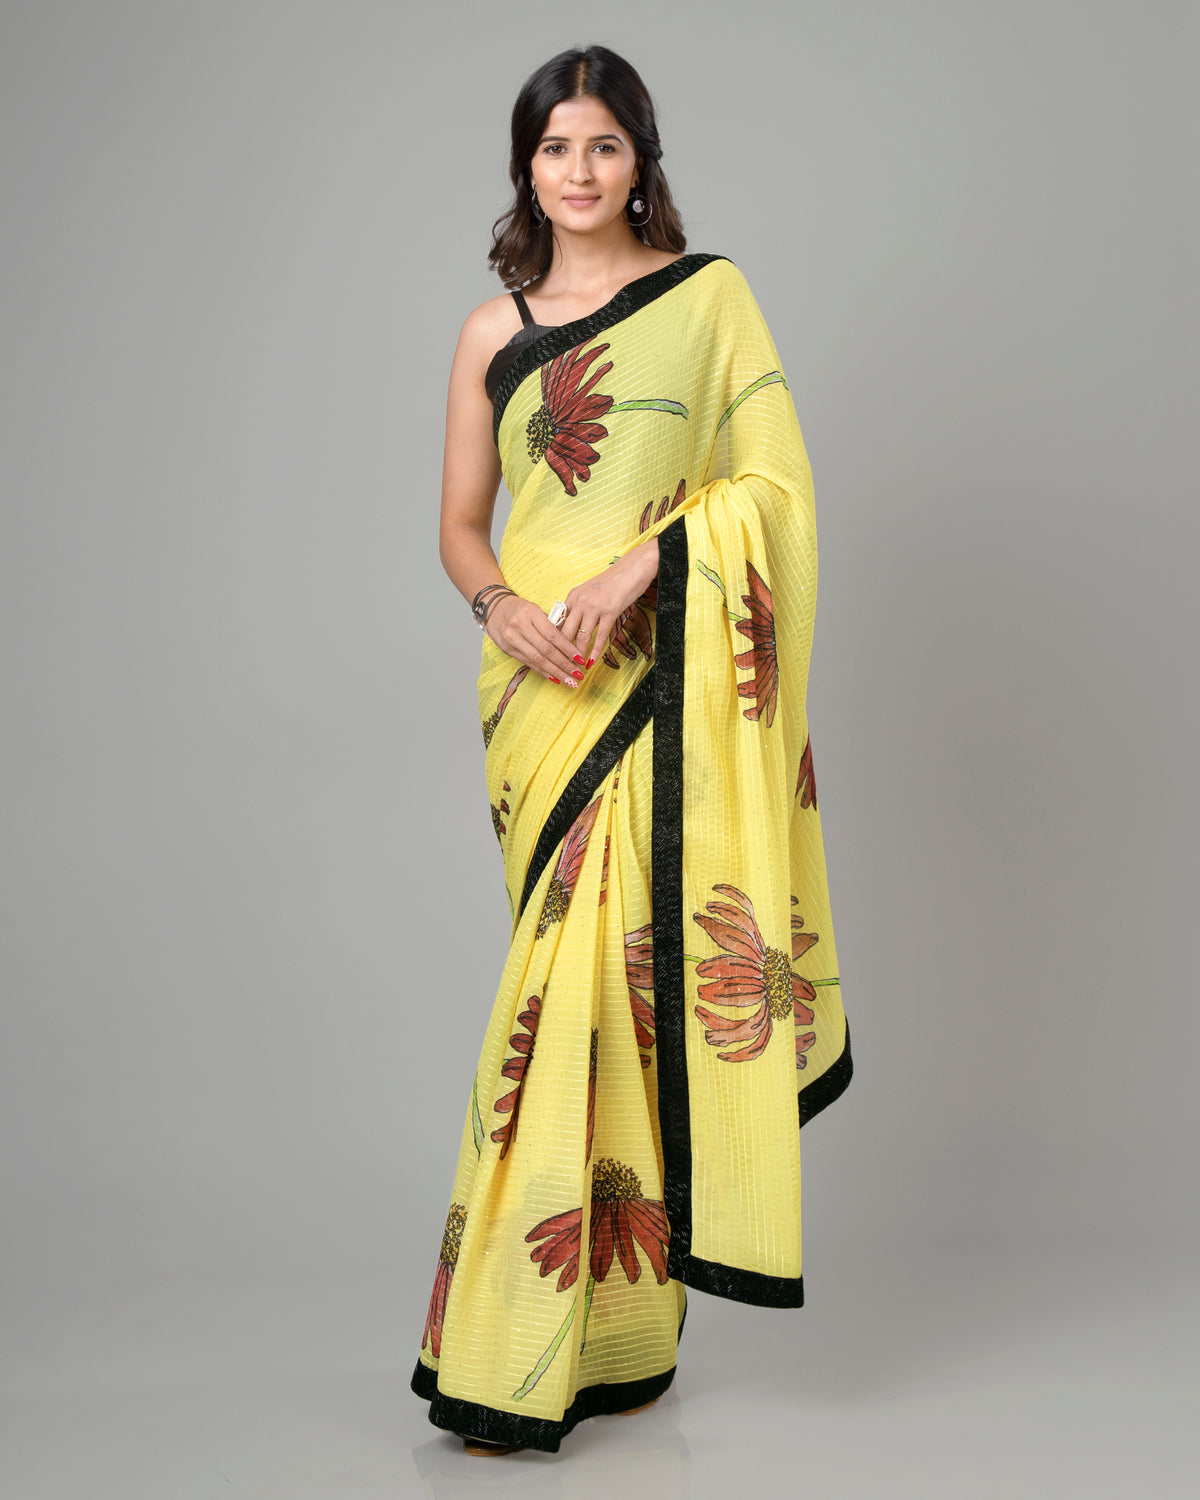 Lovely Anciant Floral Embroidery Pre-Draped Saree